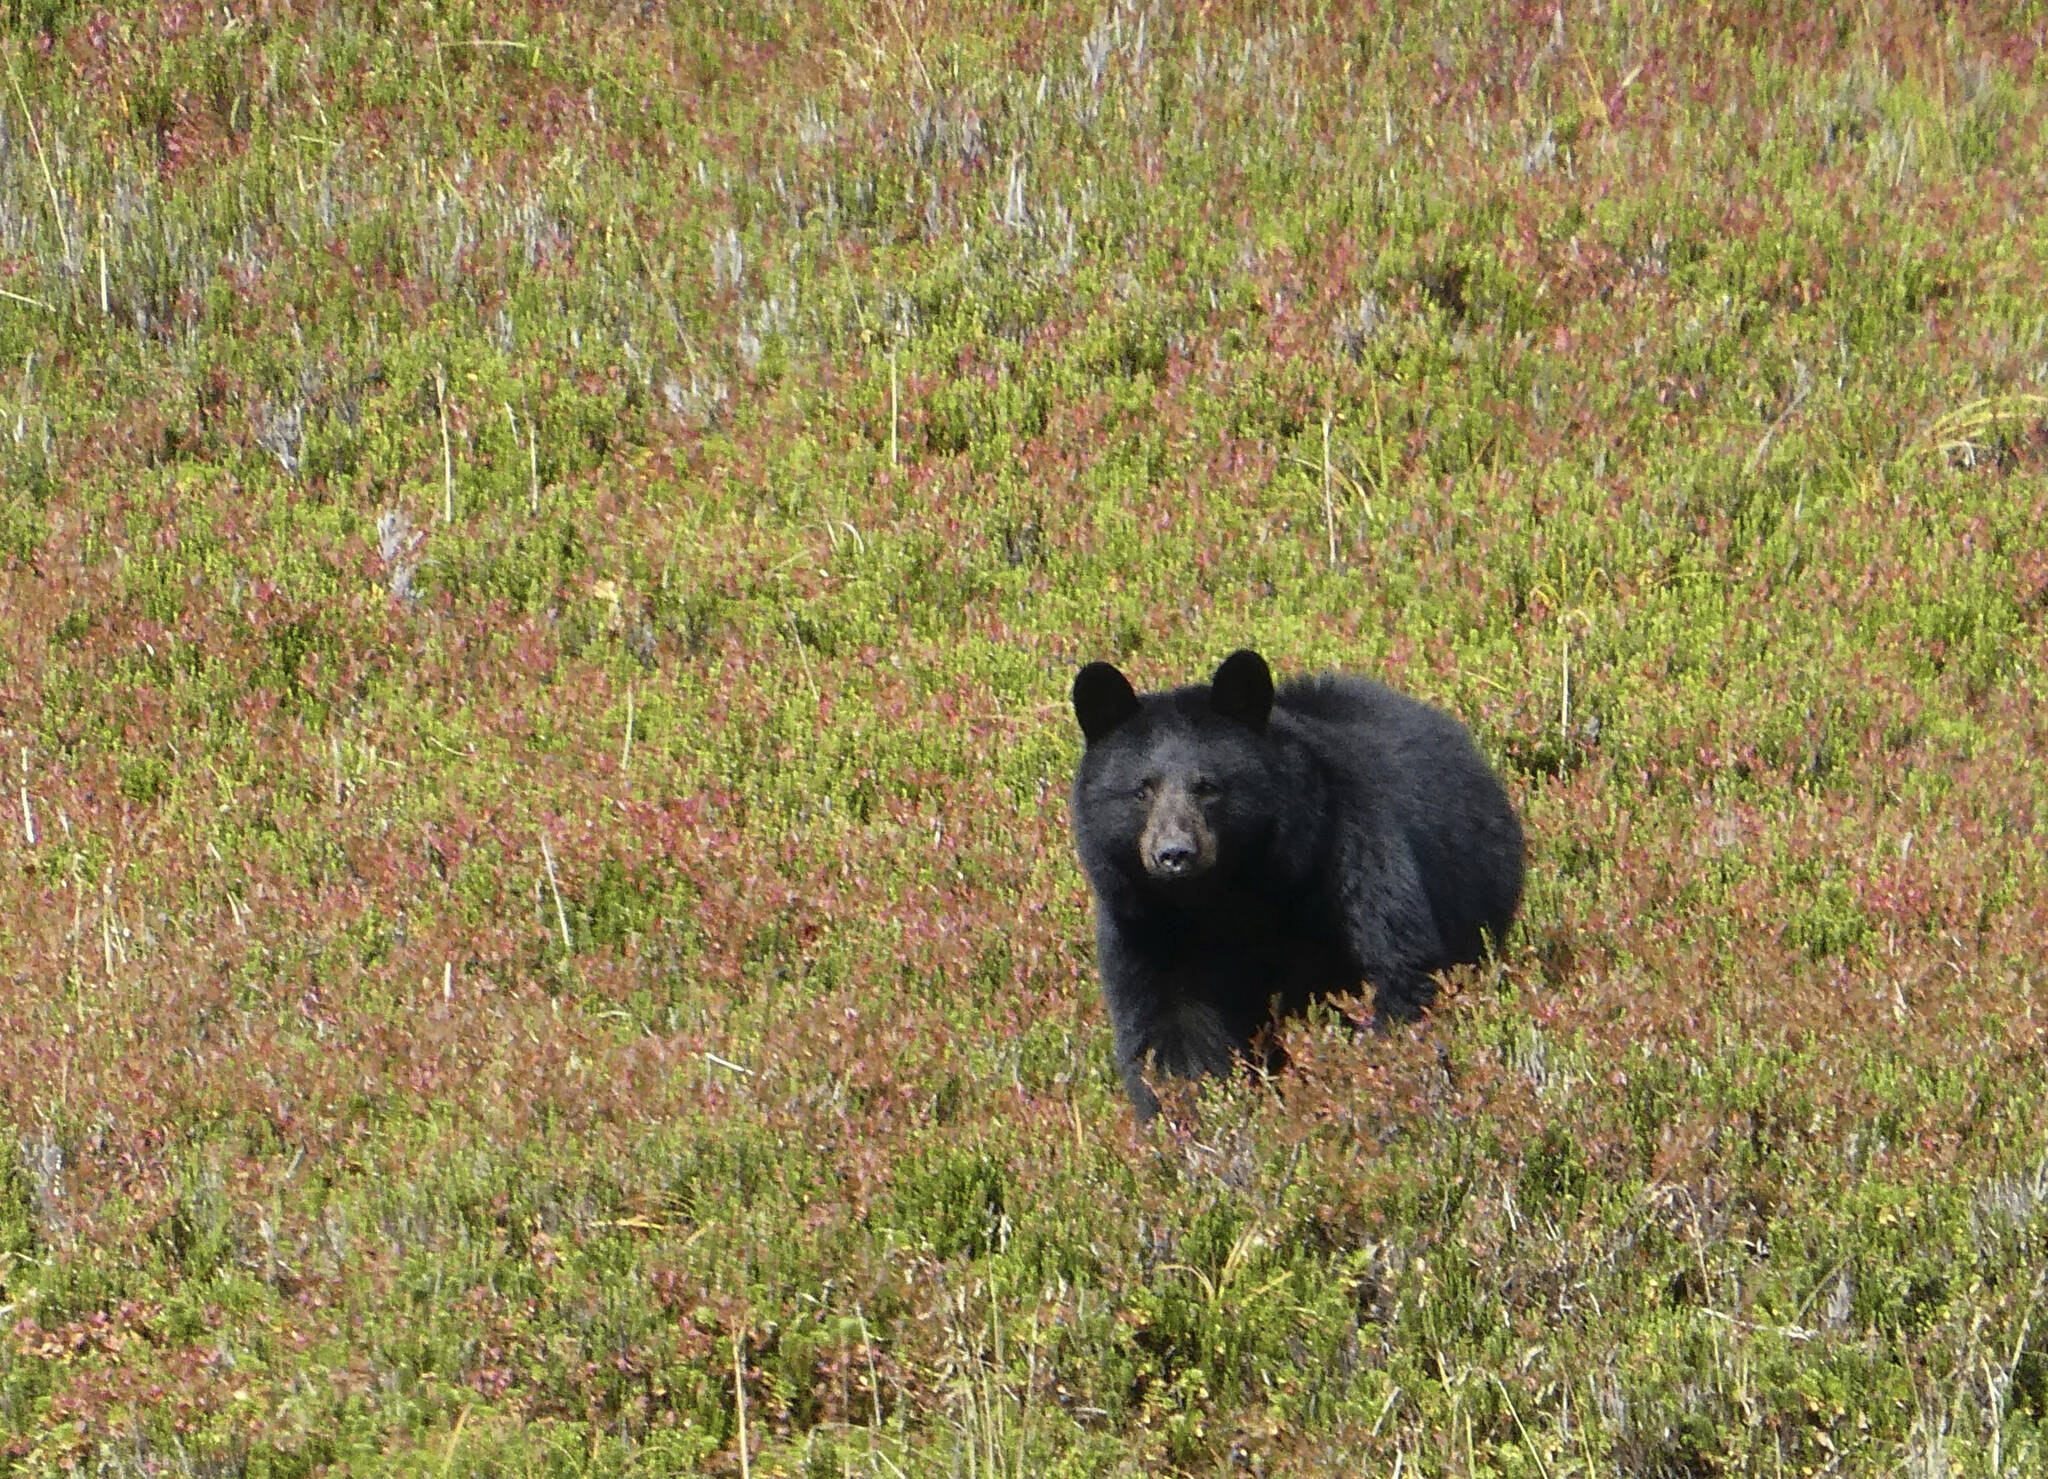 In this Wednesday, Oct. 4, 2017 photo, a black bear checks out his surroundings in Granite Basin in Juneau, Alaska. The National Park Service is proposing a rule that would prohibit bear baiting in national preserves in Alaska, the latest in a dispute over what animal rights supporters call a cruel practice. The park service said Friday, Jan. 6, 2023 it is proposing a rule barring bear baiting in national preserves in Alaska. (AP Photo / Becky Bohrer)